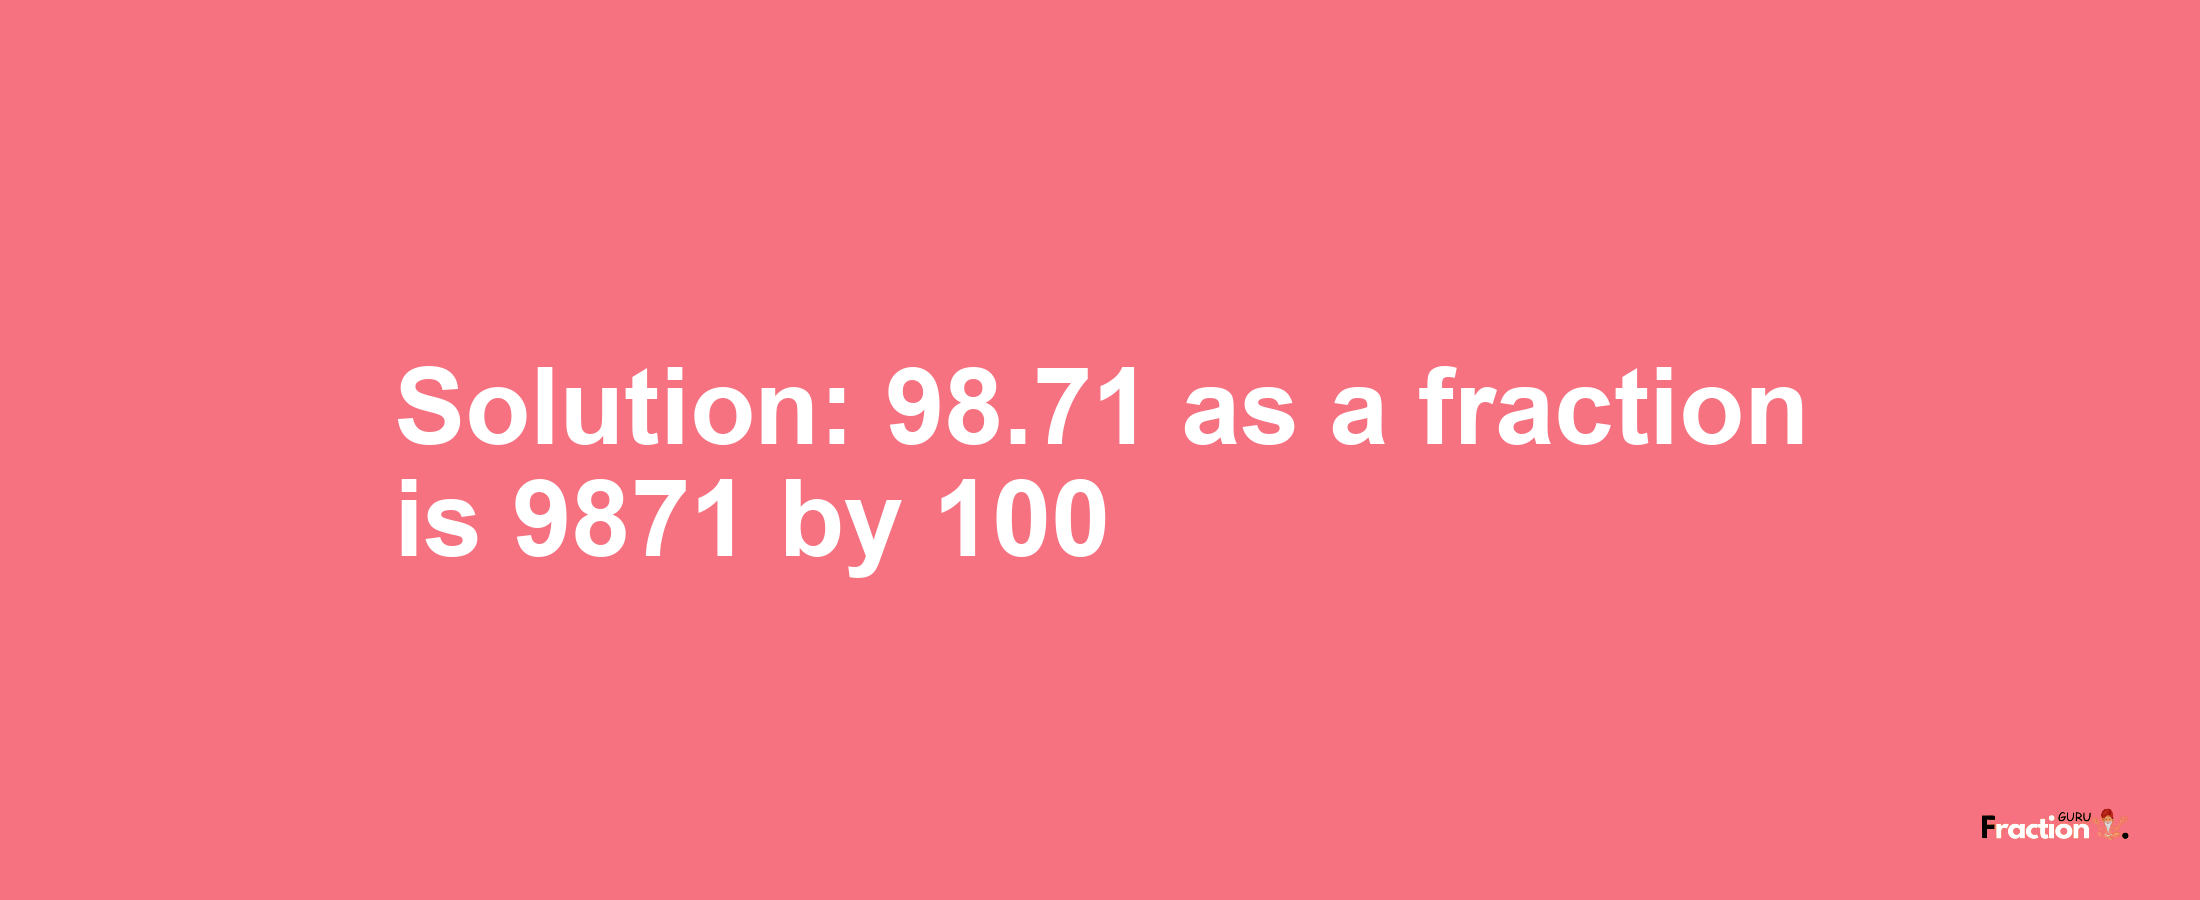 Solution:98.71 as a fraction is 9871/100